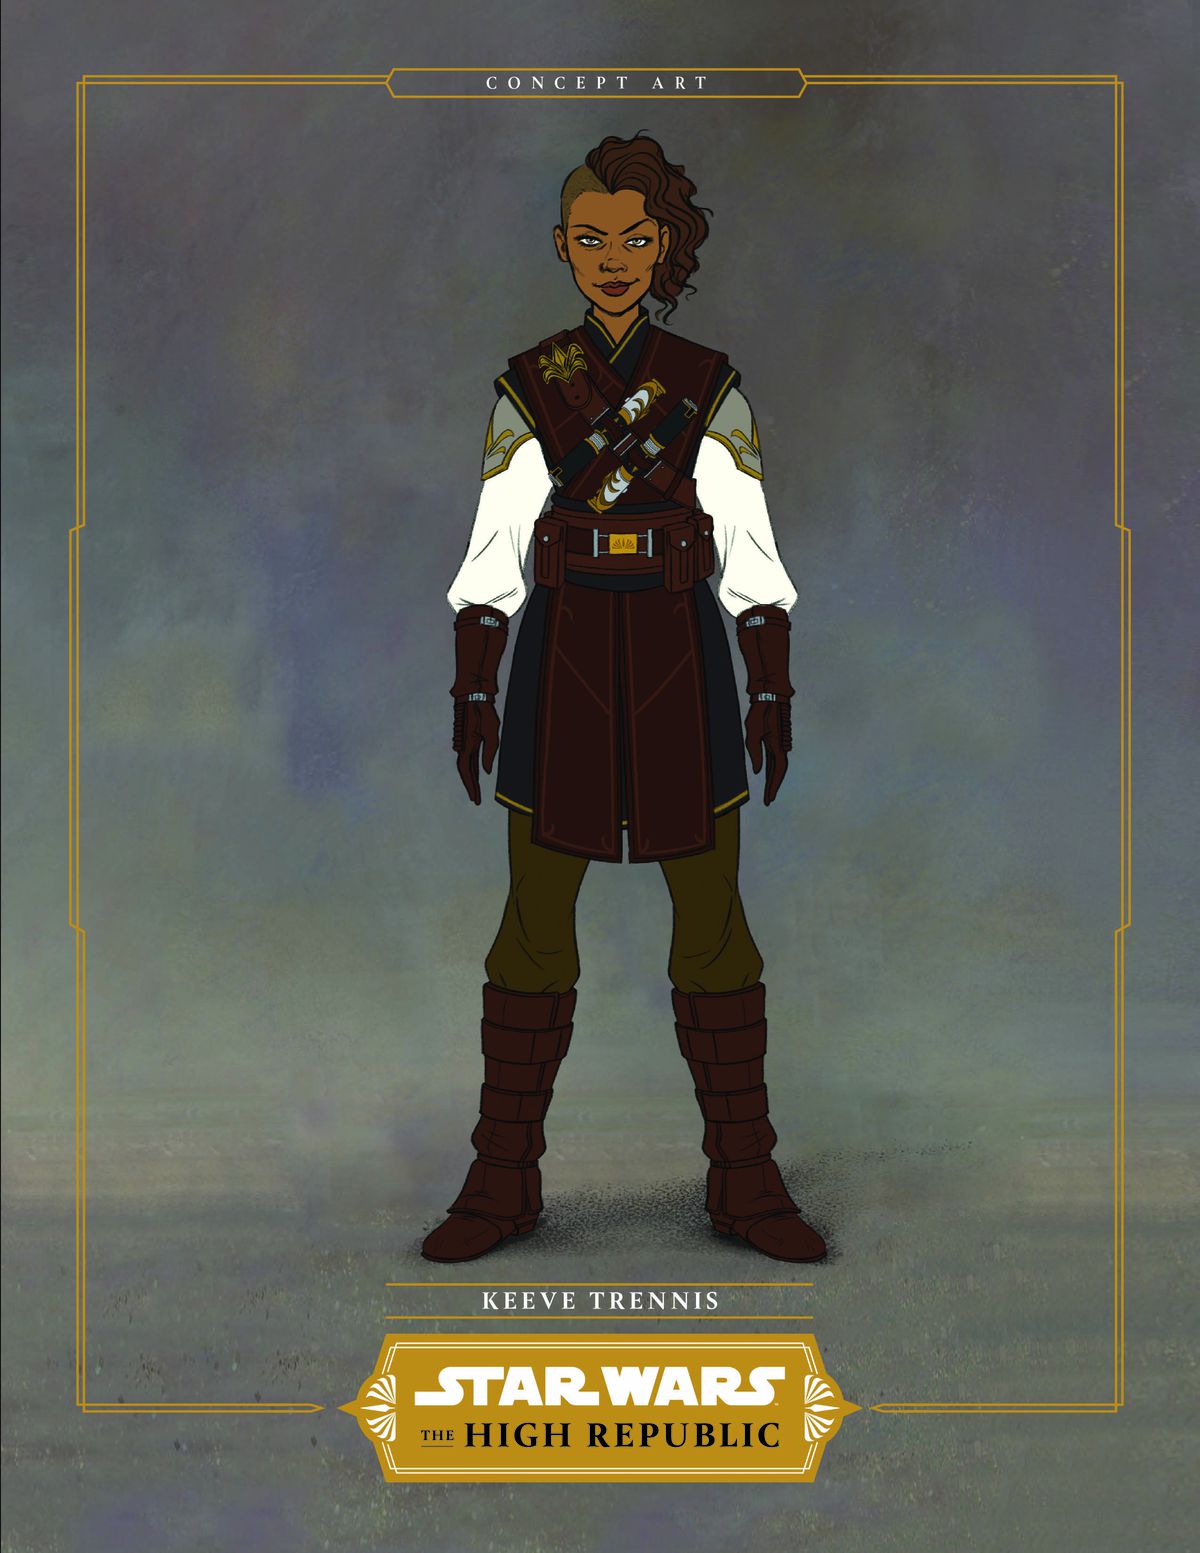 Keeve Trennis, a brown-skinned Jedi with curly hair, in black and white traveling clothes. 